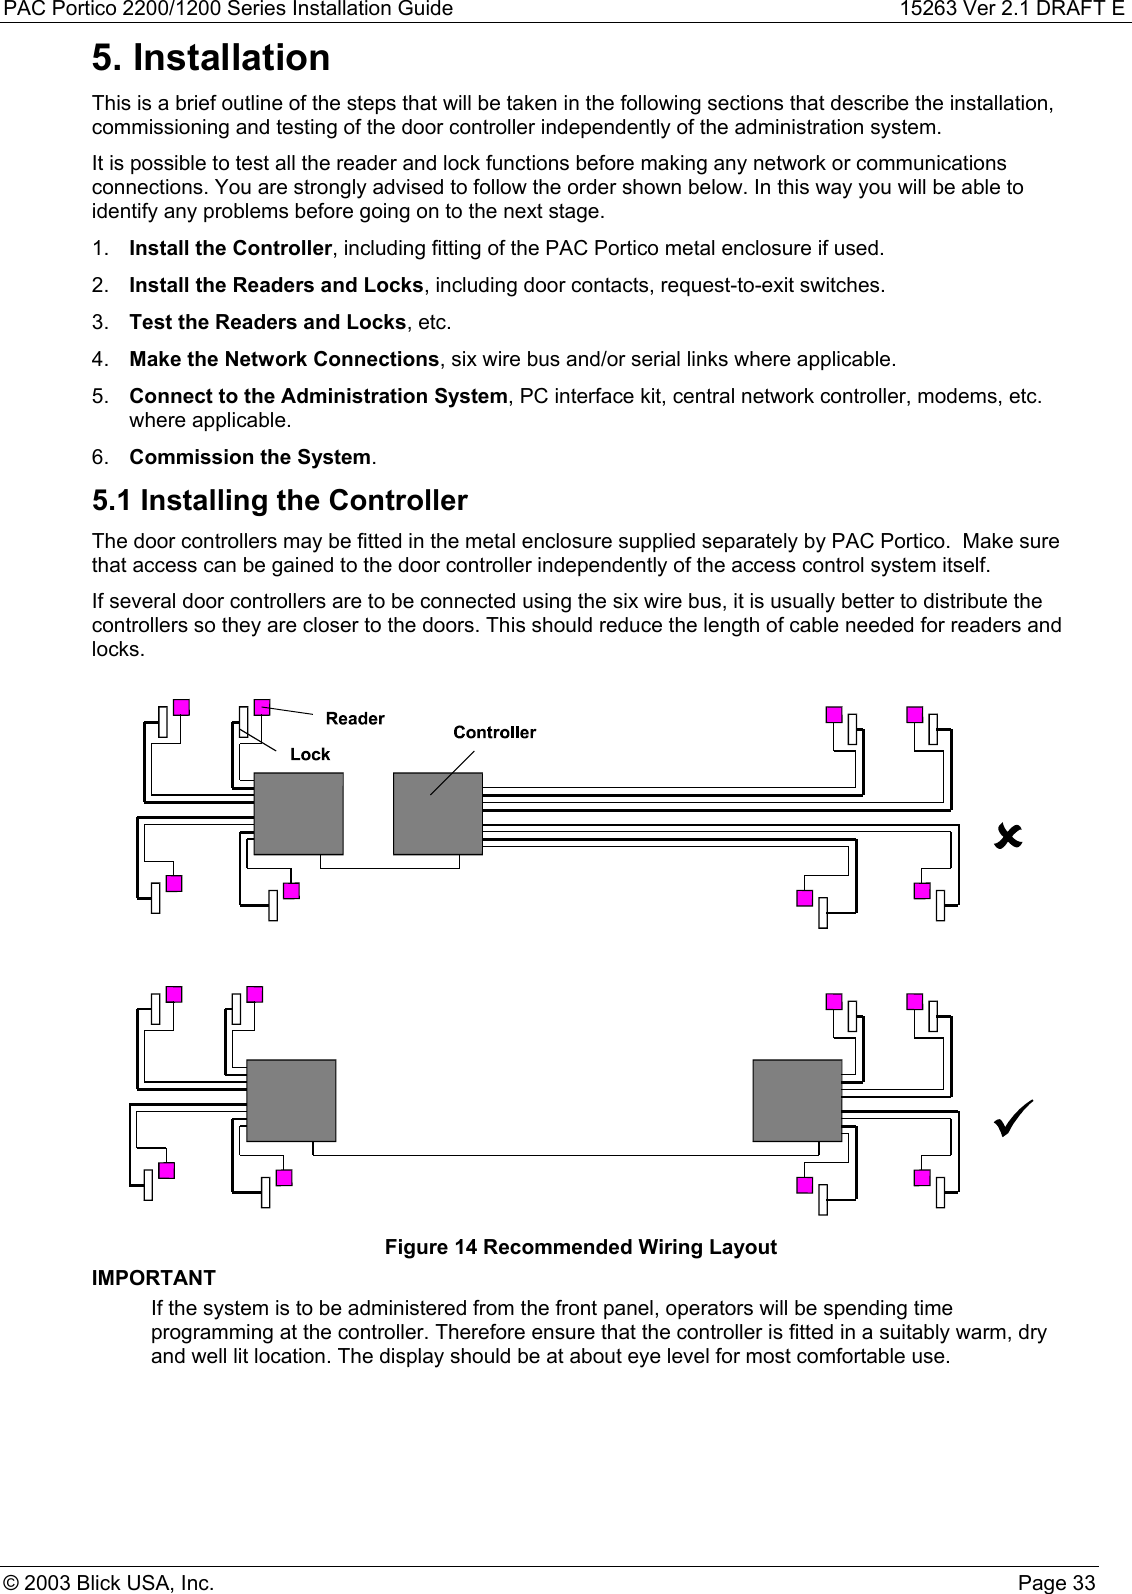 PAC Portico 2200/1200 Series Installation Guide 15263 Ver 2.1 DRAFT E© 2003 Blick USA, Inc. Page 335. InstallationThis is a brief outline of the steps that will be taken in the following sections that describe the installation,commissioning and testing of the door controller independently of the administration system.It is possible to test all the reader and lock functions before making any network or communicationsconnections. You are strongly advised to follow the order shown below. In this way you will be able toidentify any problems before going on to the next stage.1.  Install the Controller, including fitting of the PAC Portico metal enclosure if used.2.  Install the Readers and Locks, including door contacts, request-to-exit switches.3.  Test the Readers and Locks, etc.4.  Make the Network Connections, six wire bus and/or serial links where applicable.5.  Connect to the Administration System, PC interface kit, central network controller, modems, etc.where applicable.6.  Commission the System.5.1 Installing the ControllerThe door controllers may be fitted in the metal enclosure supplied separately by PAC Portico.  Make surethat access can be gained to the door controller independently of the access control system itself.If several door controllers are to be connected using the six wire bus, it is usually better to distribute thecontrollers so they are closer to the doors. This should reduce the length of cable needed for readers andlocks.Figure 14 Recommended Wiring LayoutIMPORTANTIf the system is to be administered from the front panel, operators will be spending timeprogramming at the controller. Therefore ensure that the controller is fitted in a suitably warm, dryand well lit location. The display should be at about eye level for most comfortable use.